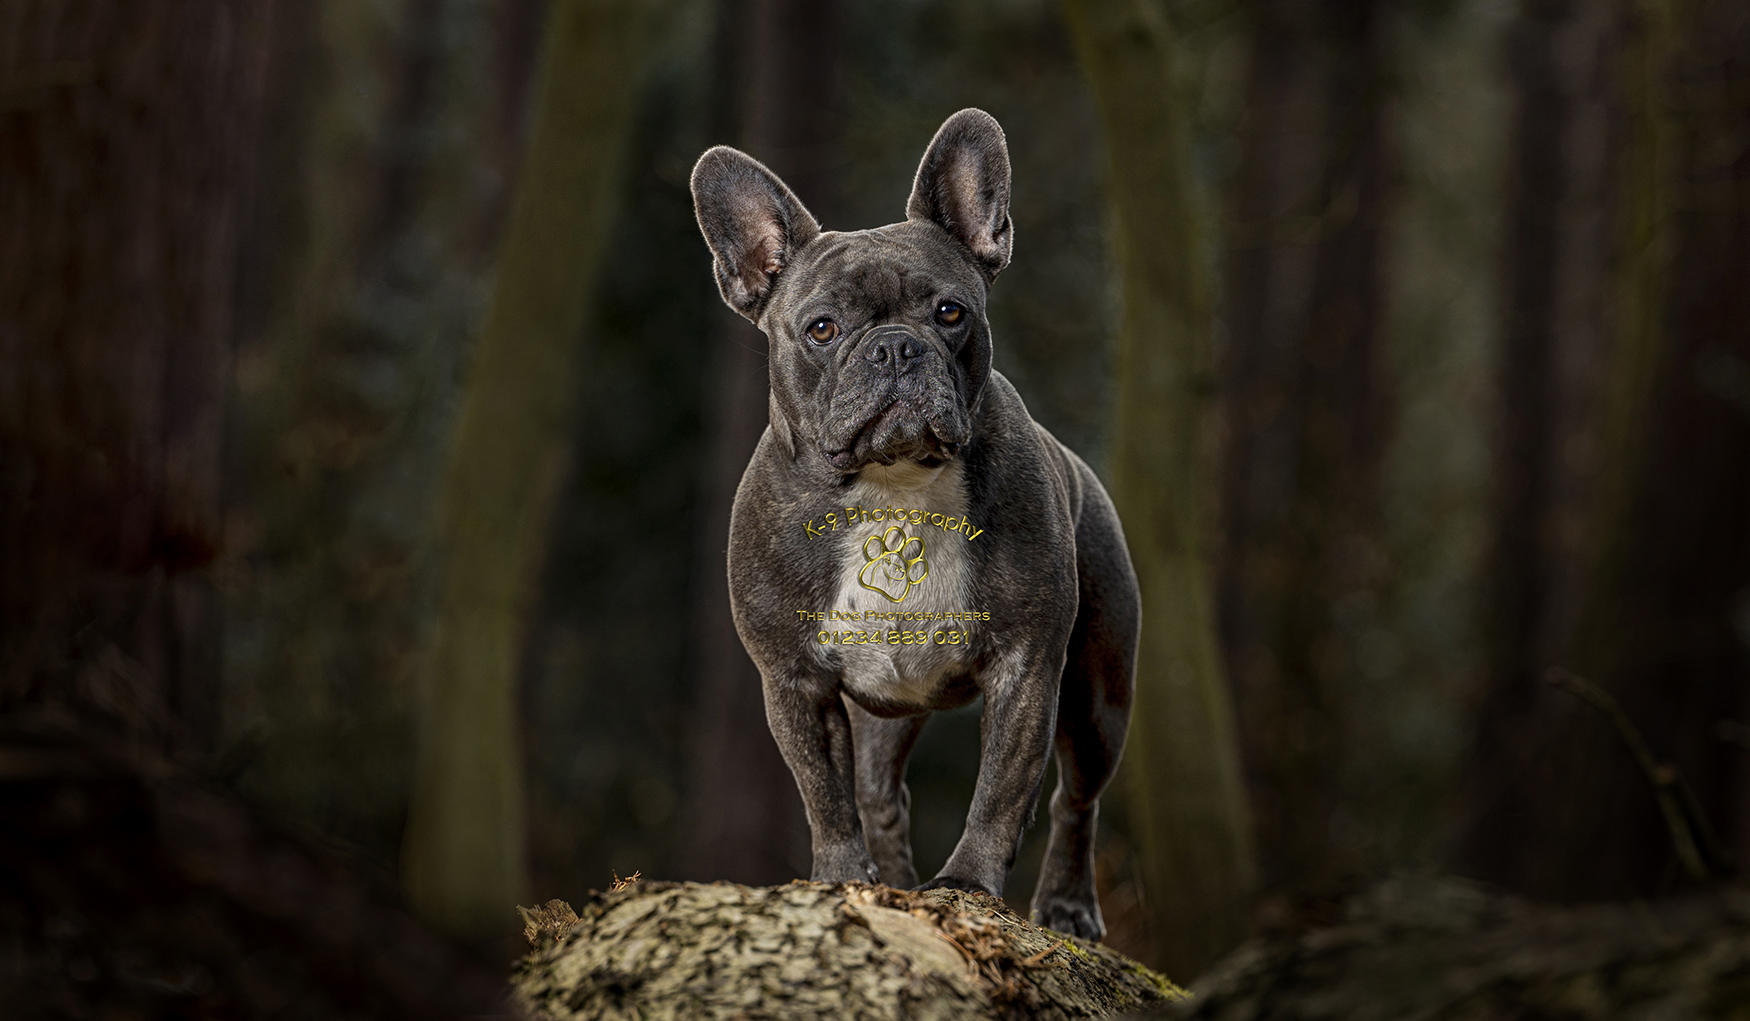 Why do you need to book a professional dog photographer? dog photography in London and the surrounding area by Adrian Bullers